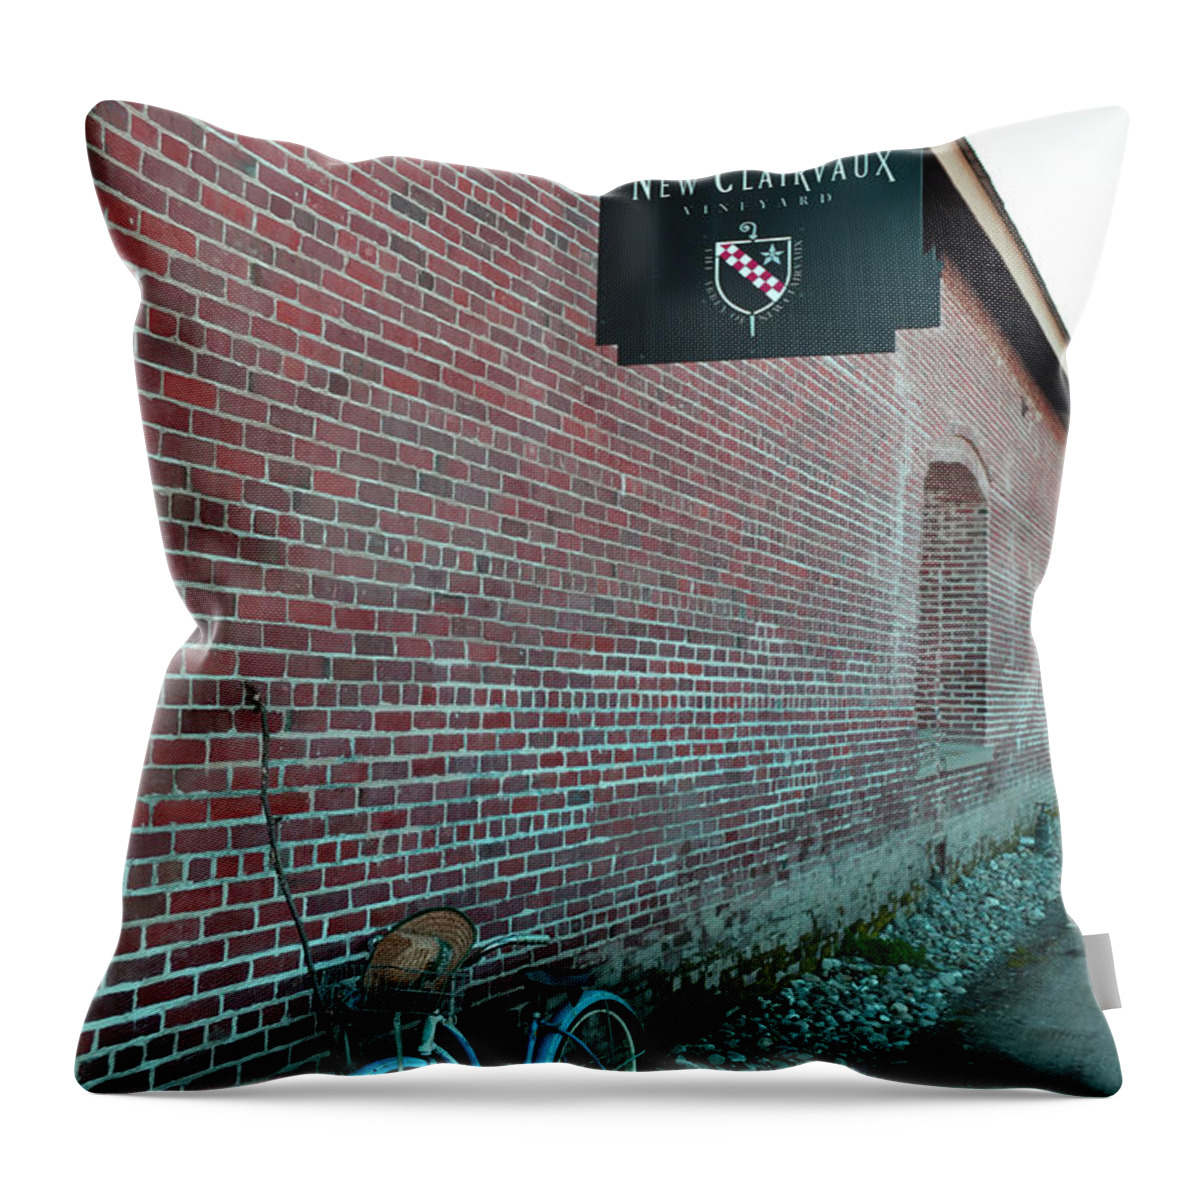 Monk Throw Pillow featuring the photograph Wine Break by Holly Blunkall